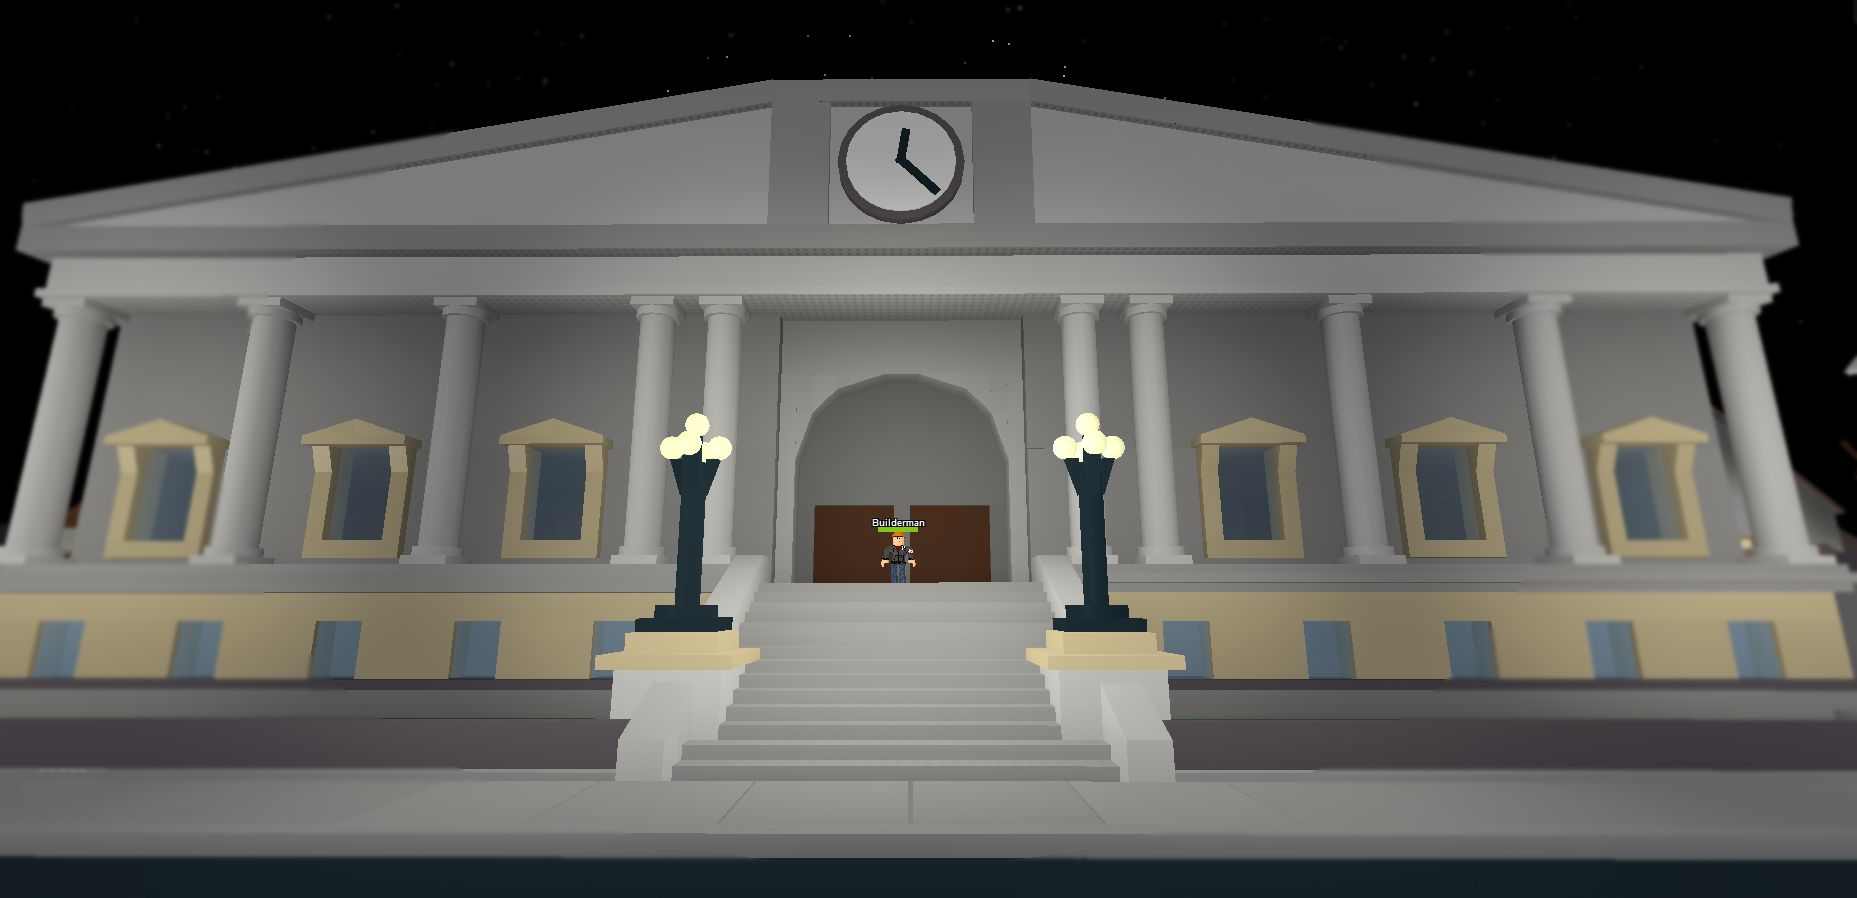 Introducing Roblox Halloween 2013 The Witching Hour Roblox Blog - witching hour roblox rats